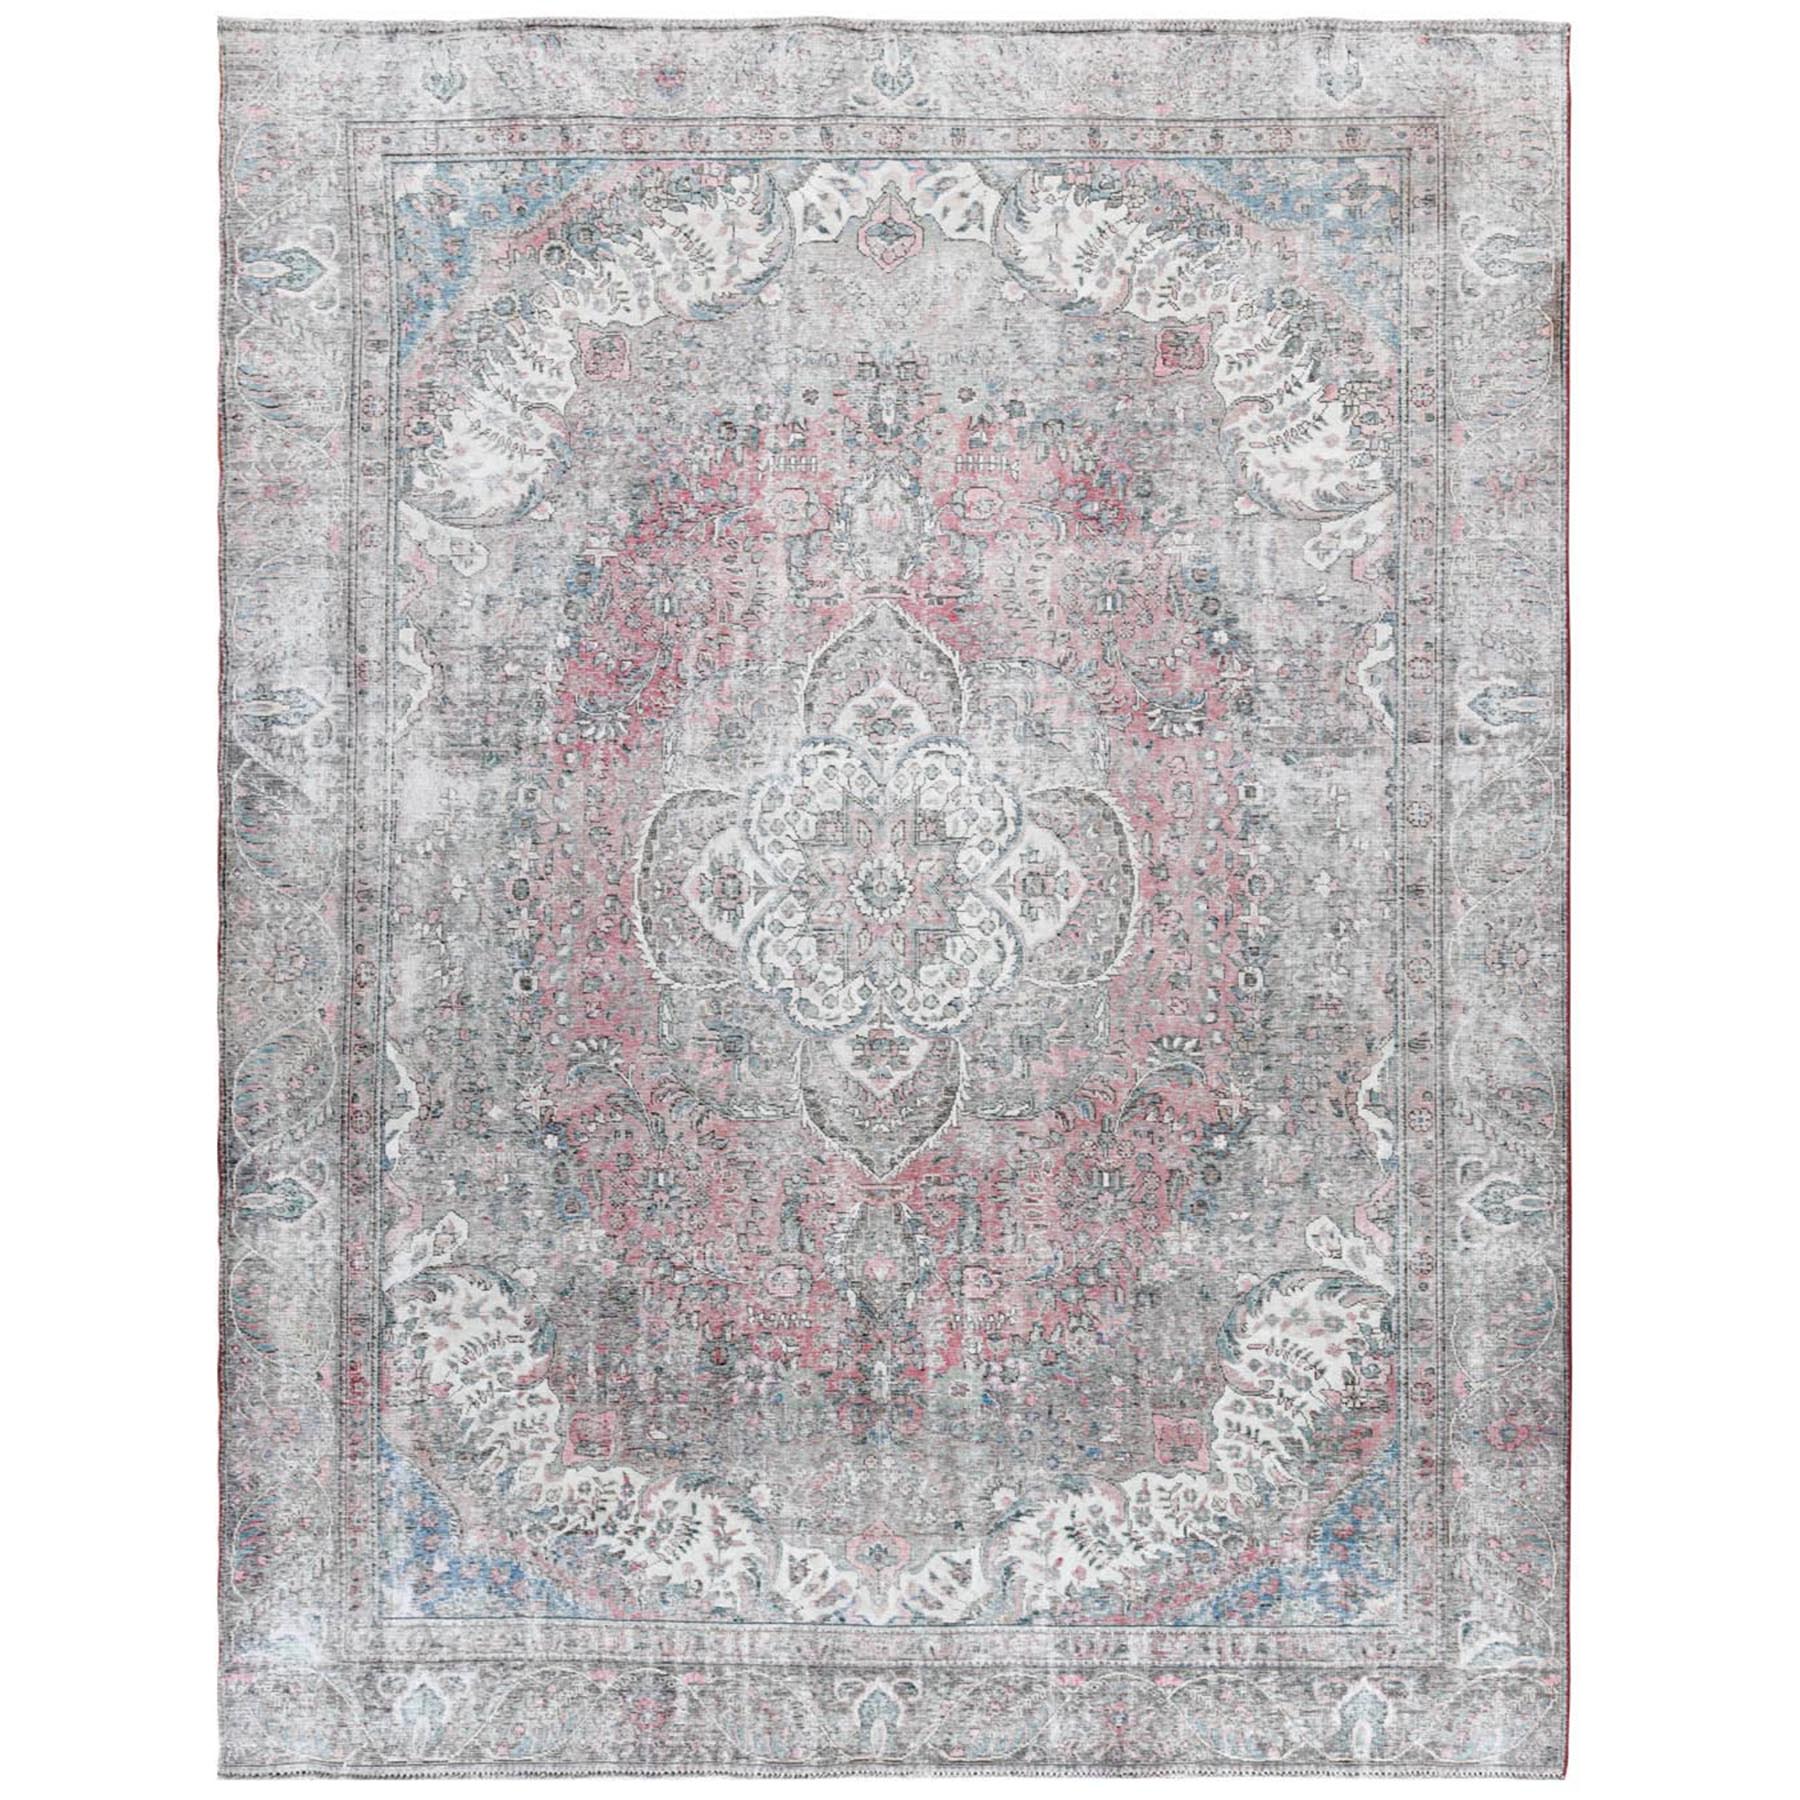 Hand Woven Faded Red Persian Tabriz, Faded Oriental Rug